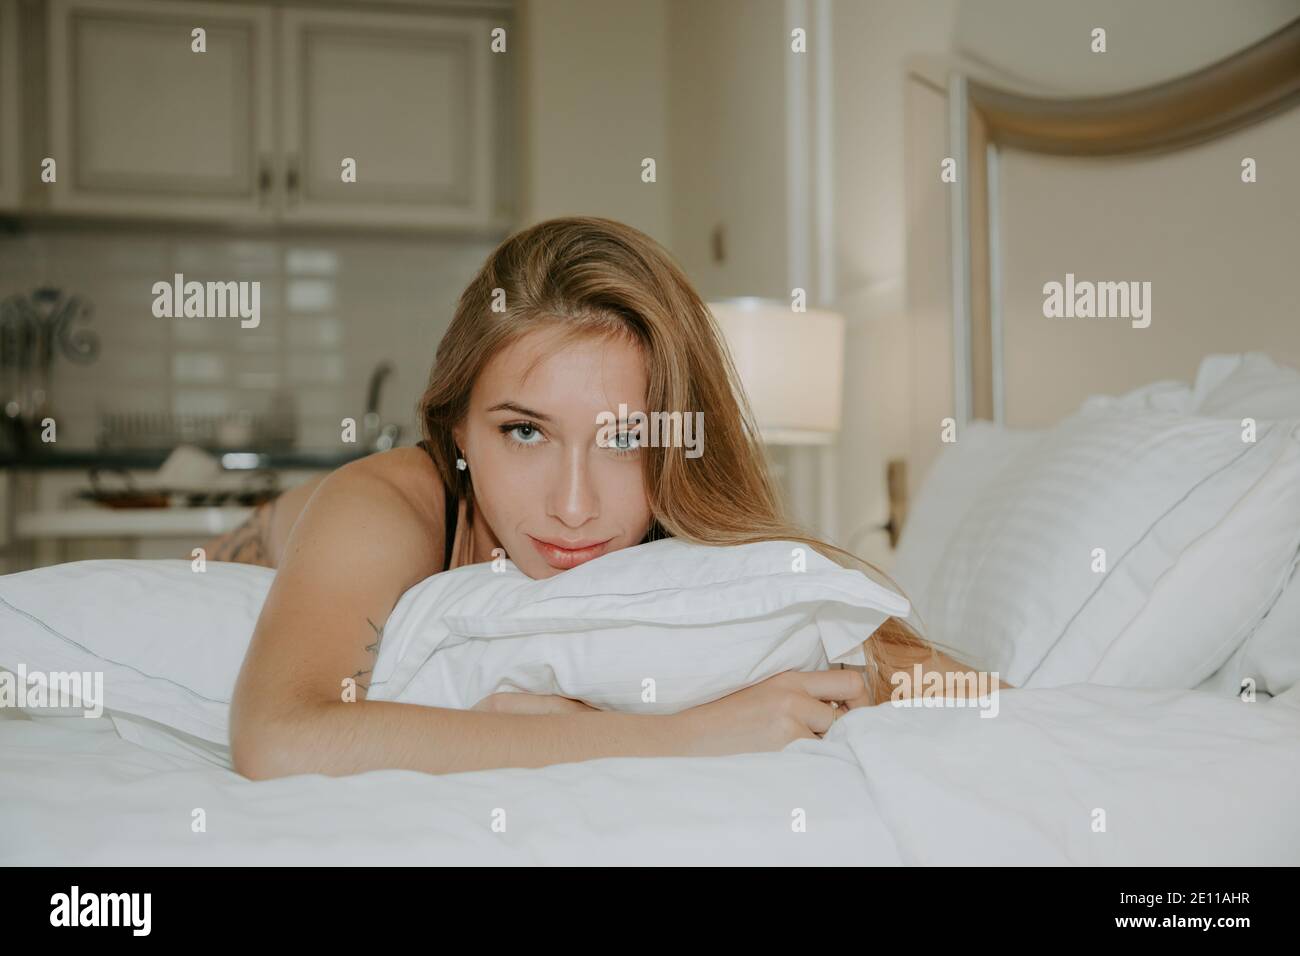 Portrait of a pretty girl with long hair lying on a white pillow on her bed; she looks natural, She is looking intensely at us. Kitchen in background Stock Photo